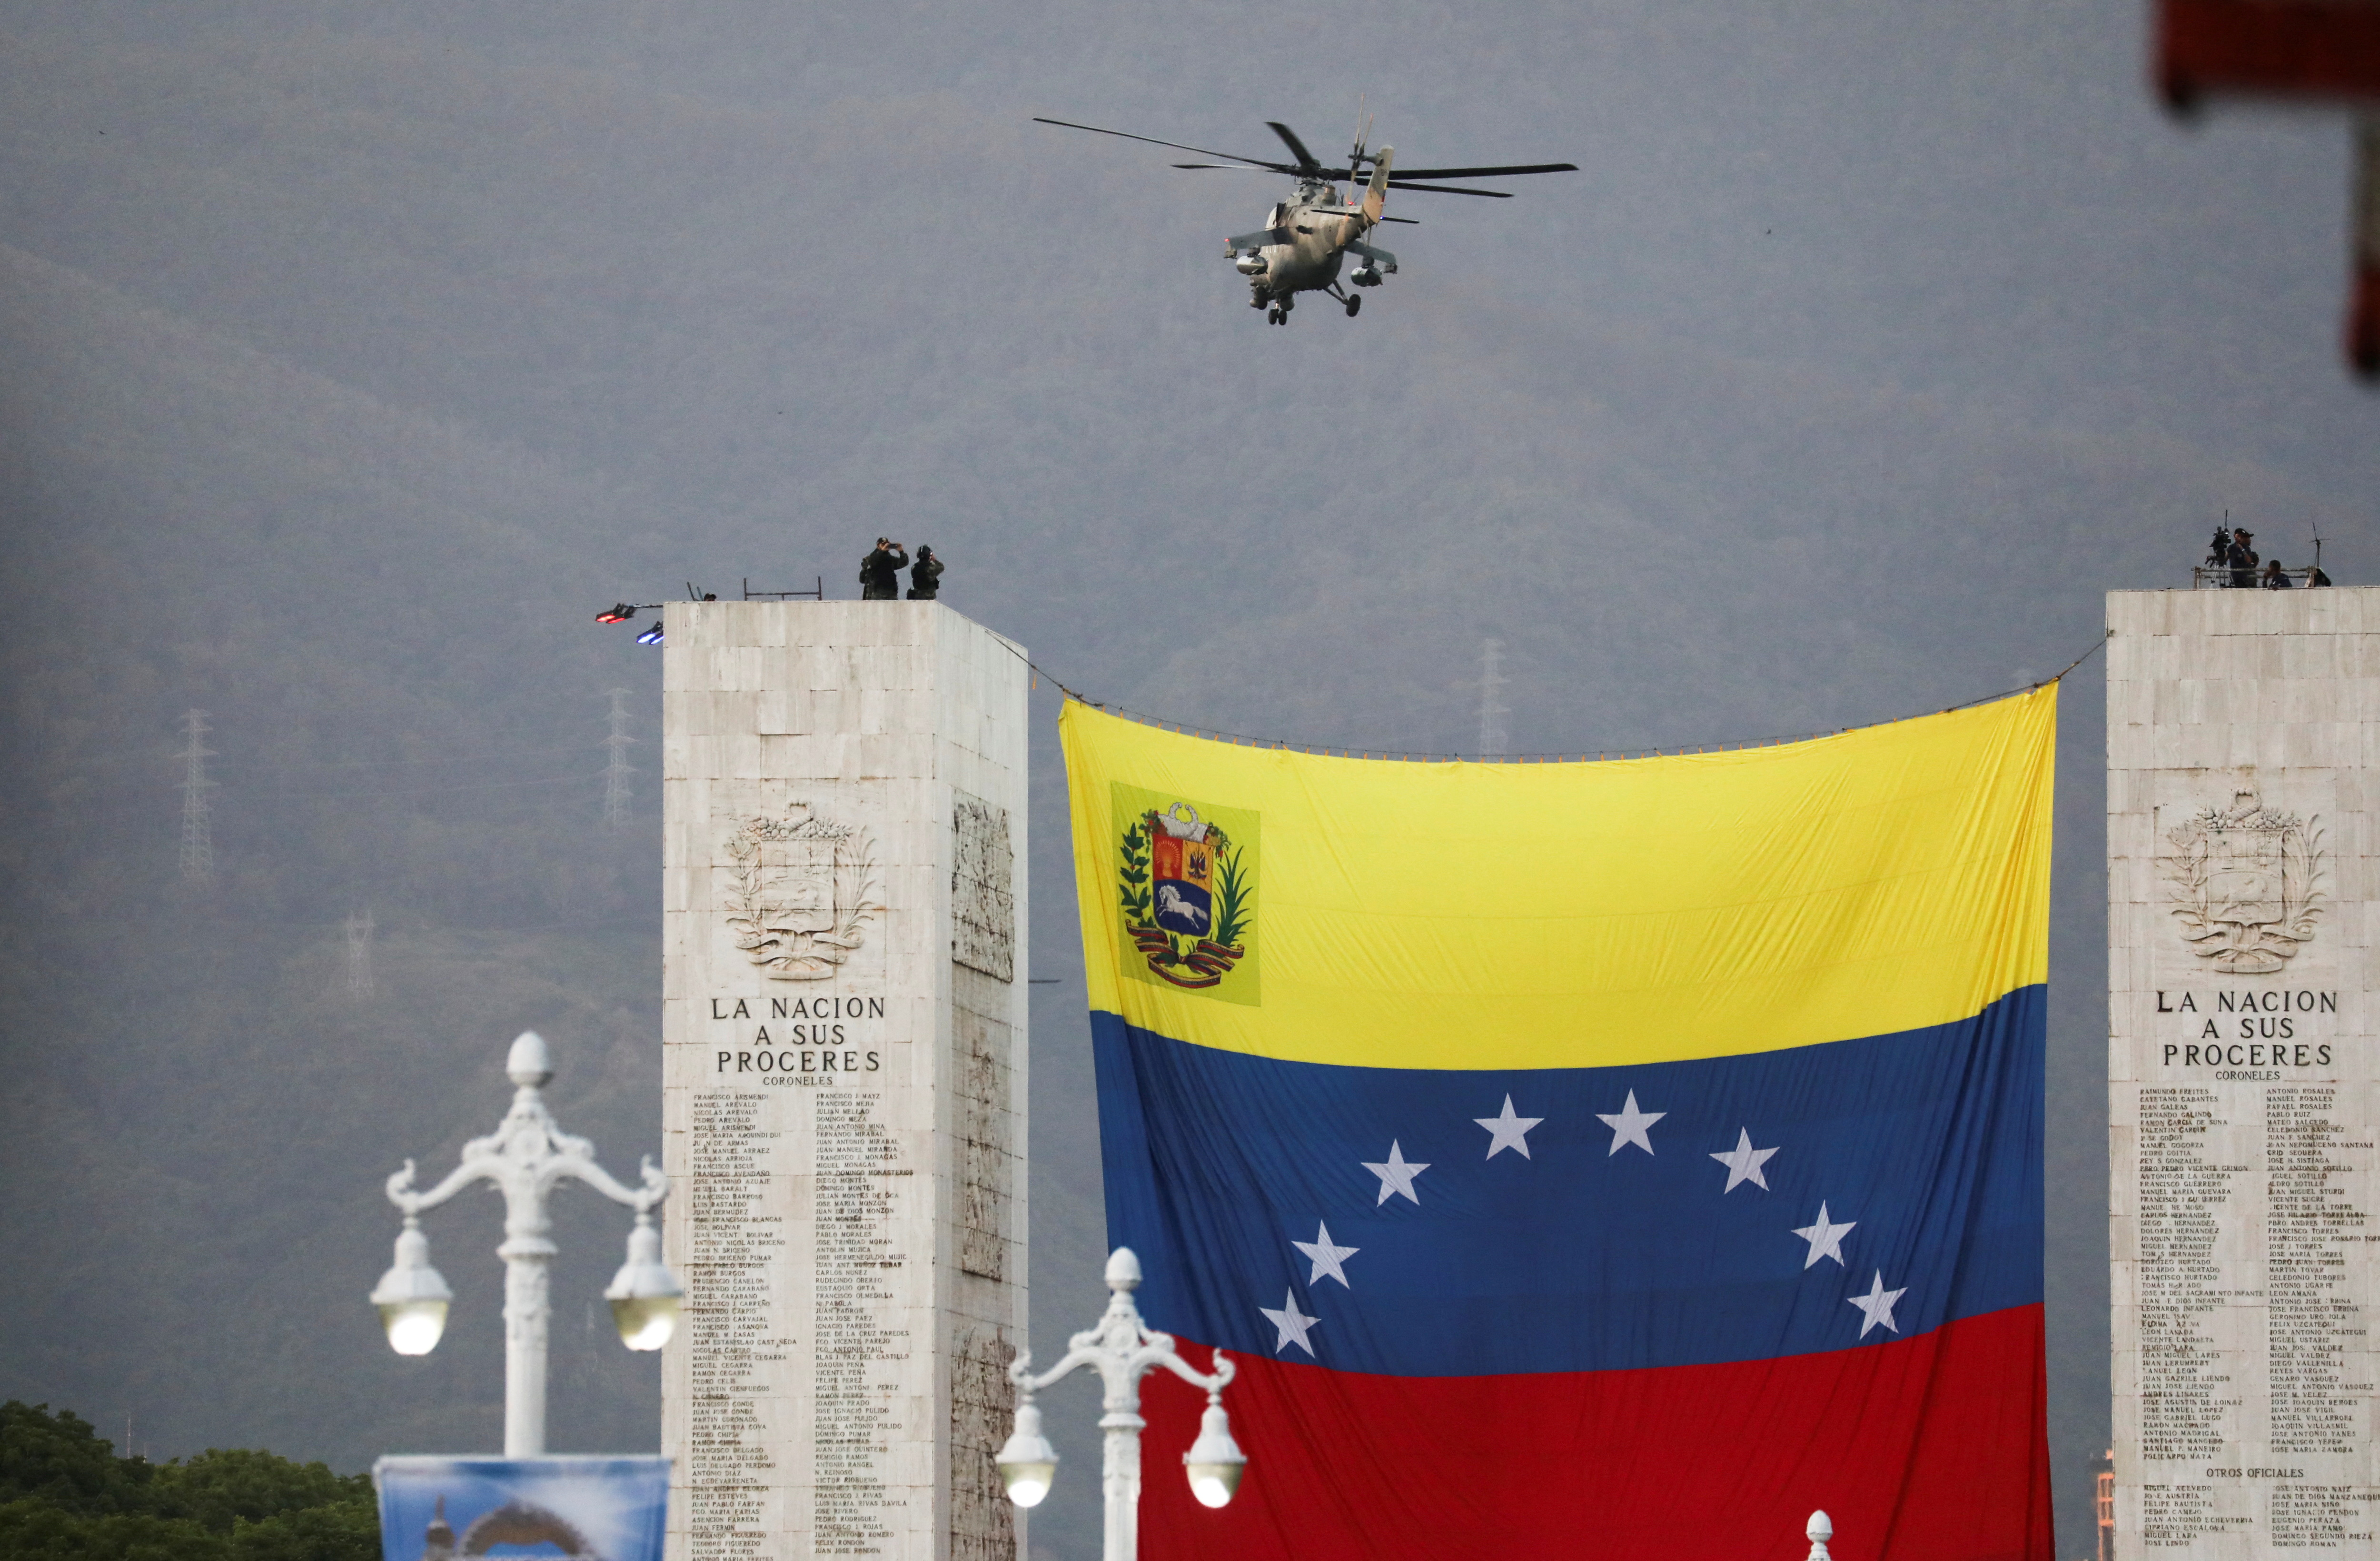 Parade to celebrate the 210th anniversary of Venezuela's independence, in Caracas